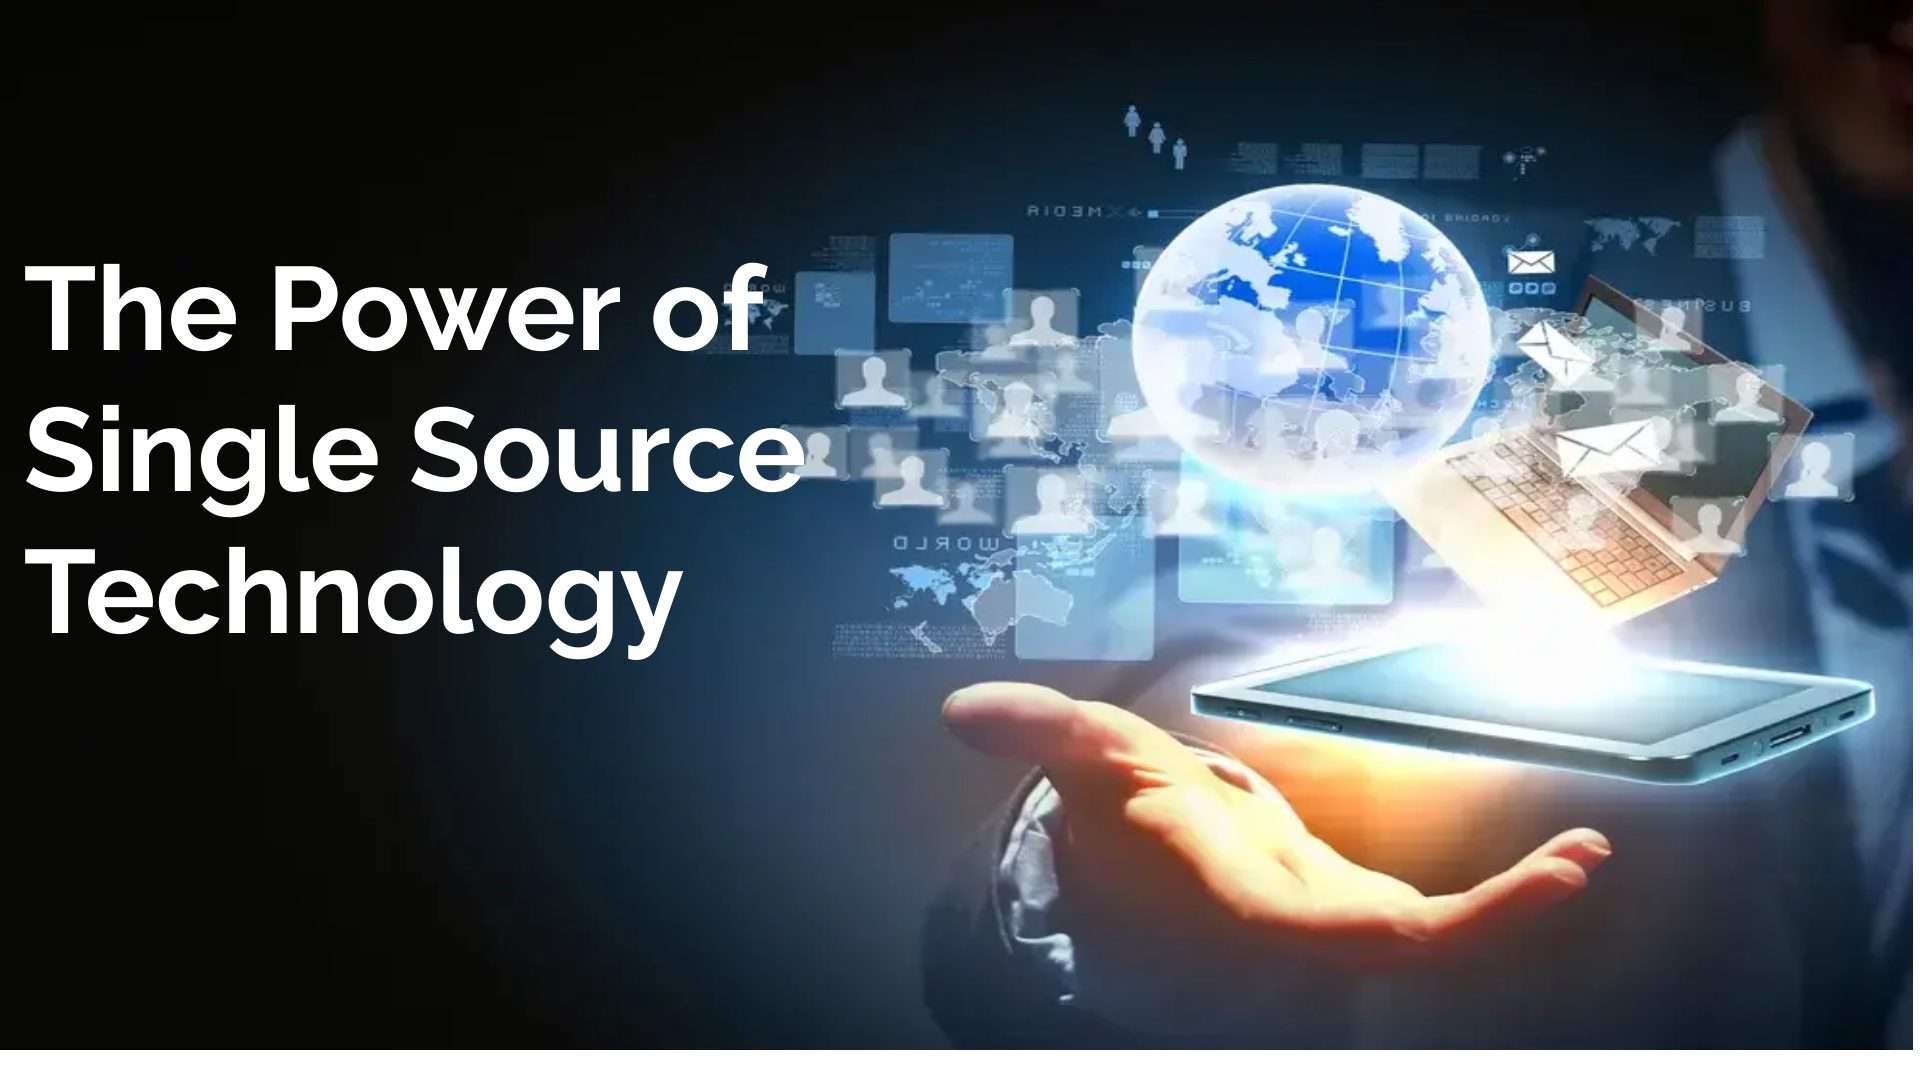 The power of single source technology